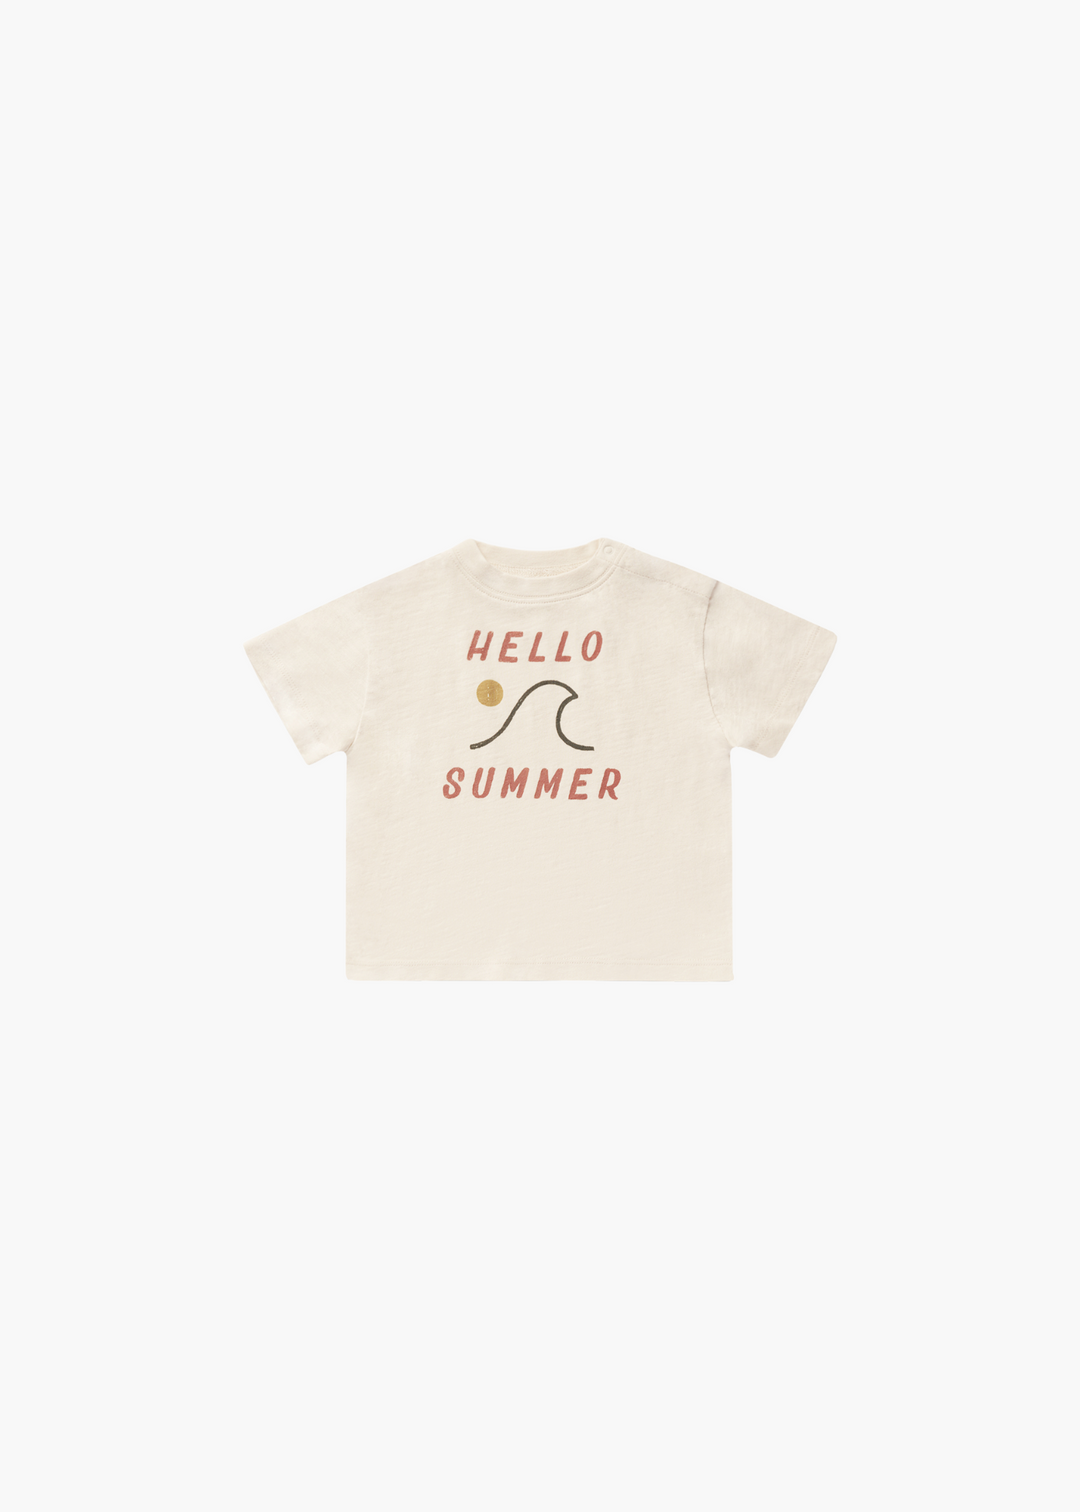 Relaxed Tee || Hello Summer